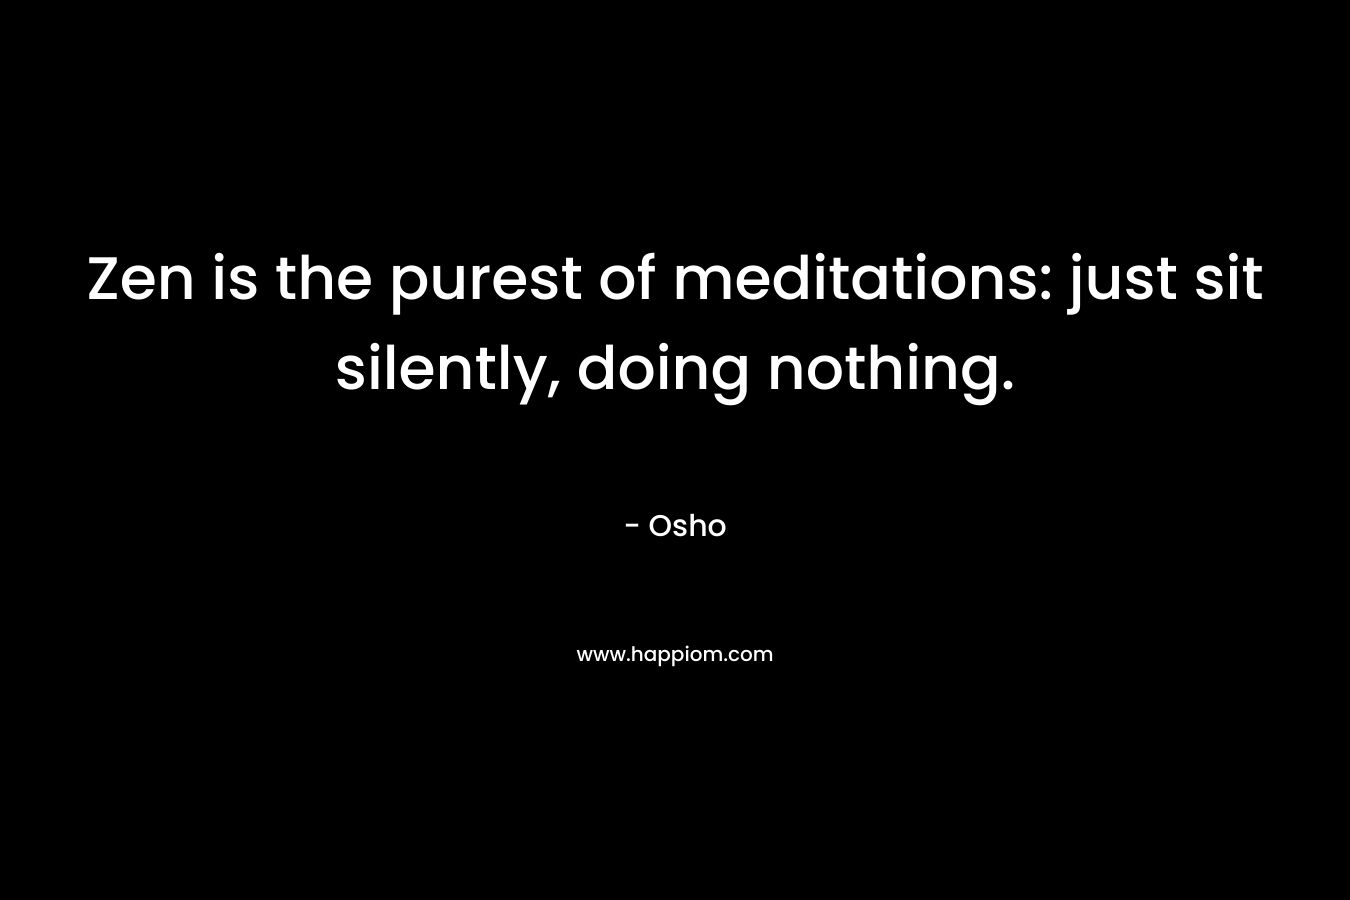 Zen is the purest of meditations: just sit silently, doing nothing.